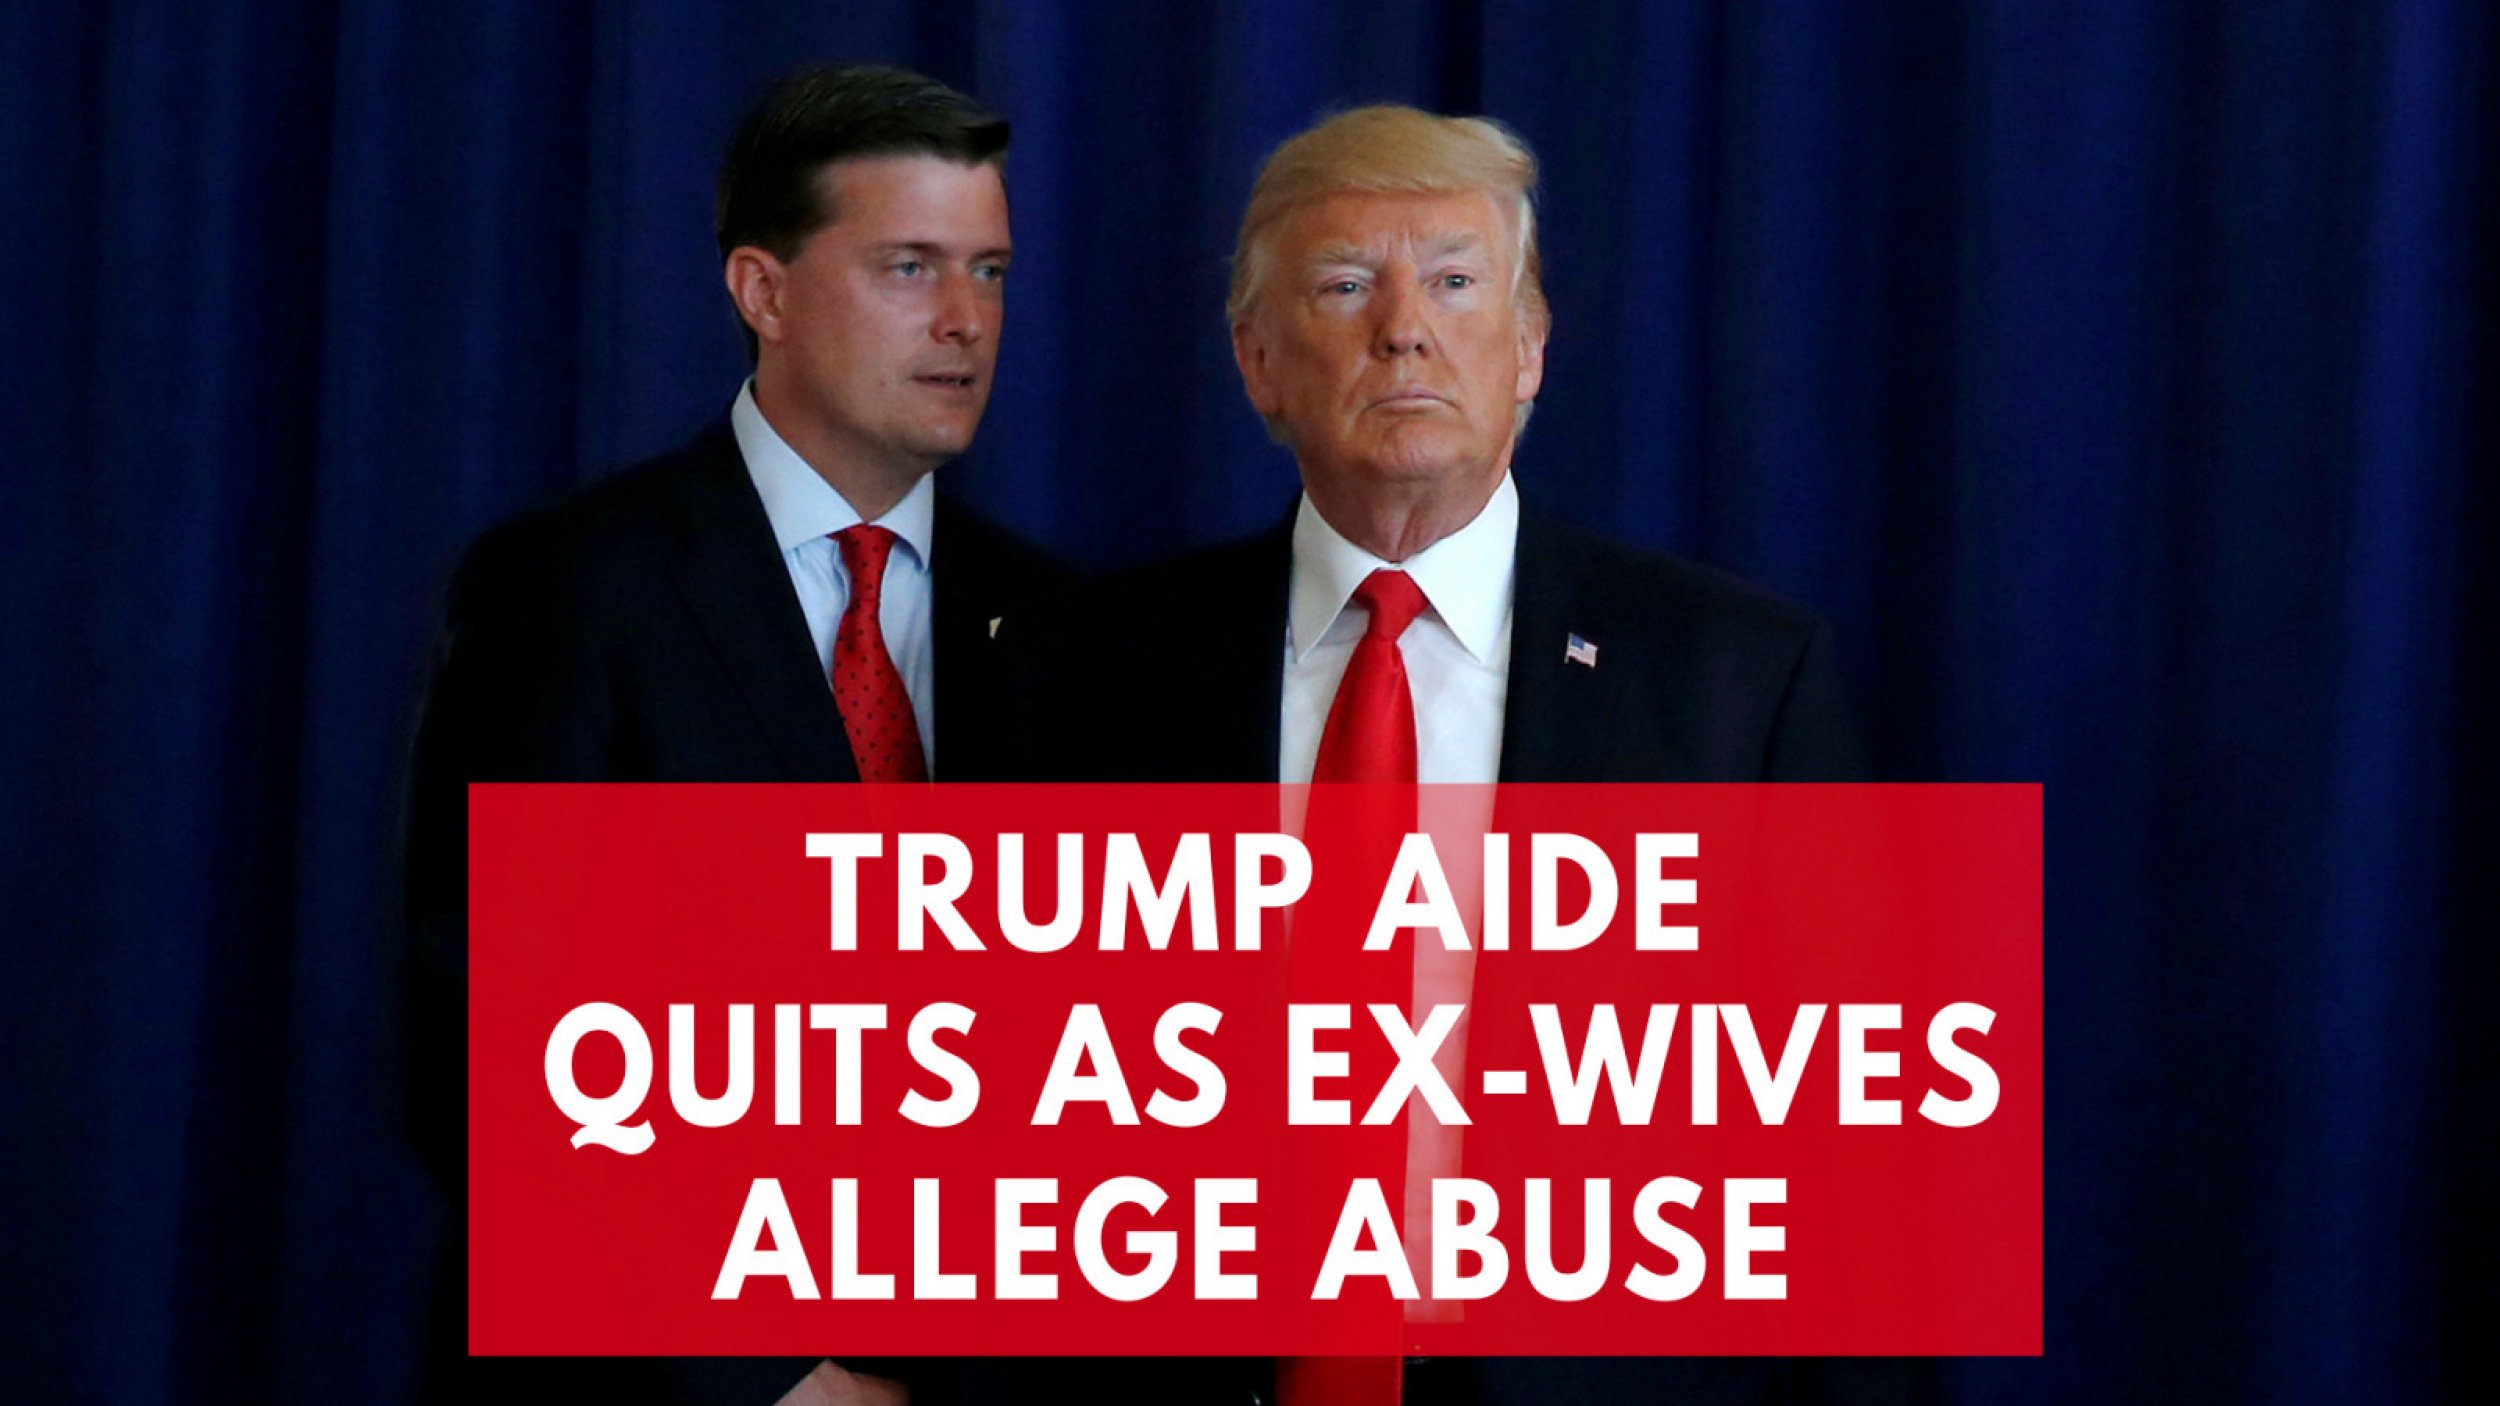 President Trumps Top Aide Quits Amid Abuse Accusation By Ex-Wives